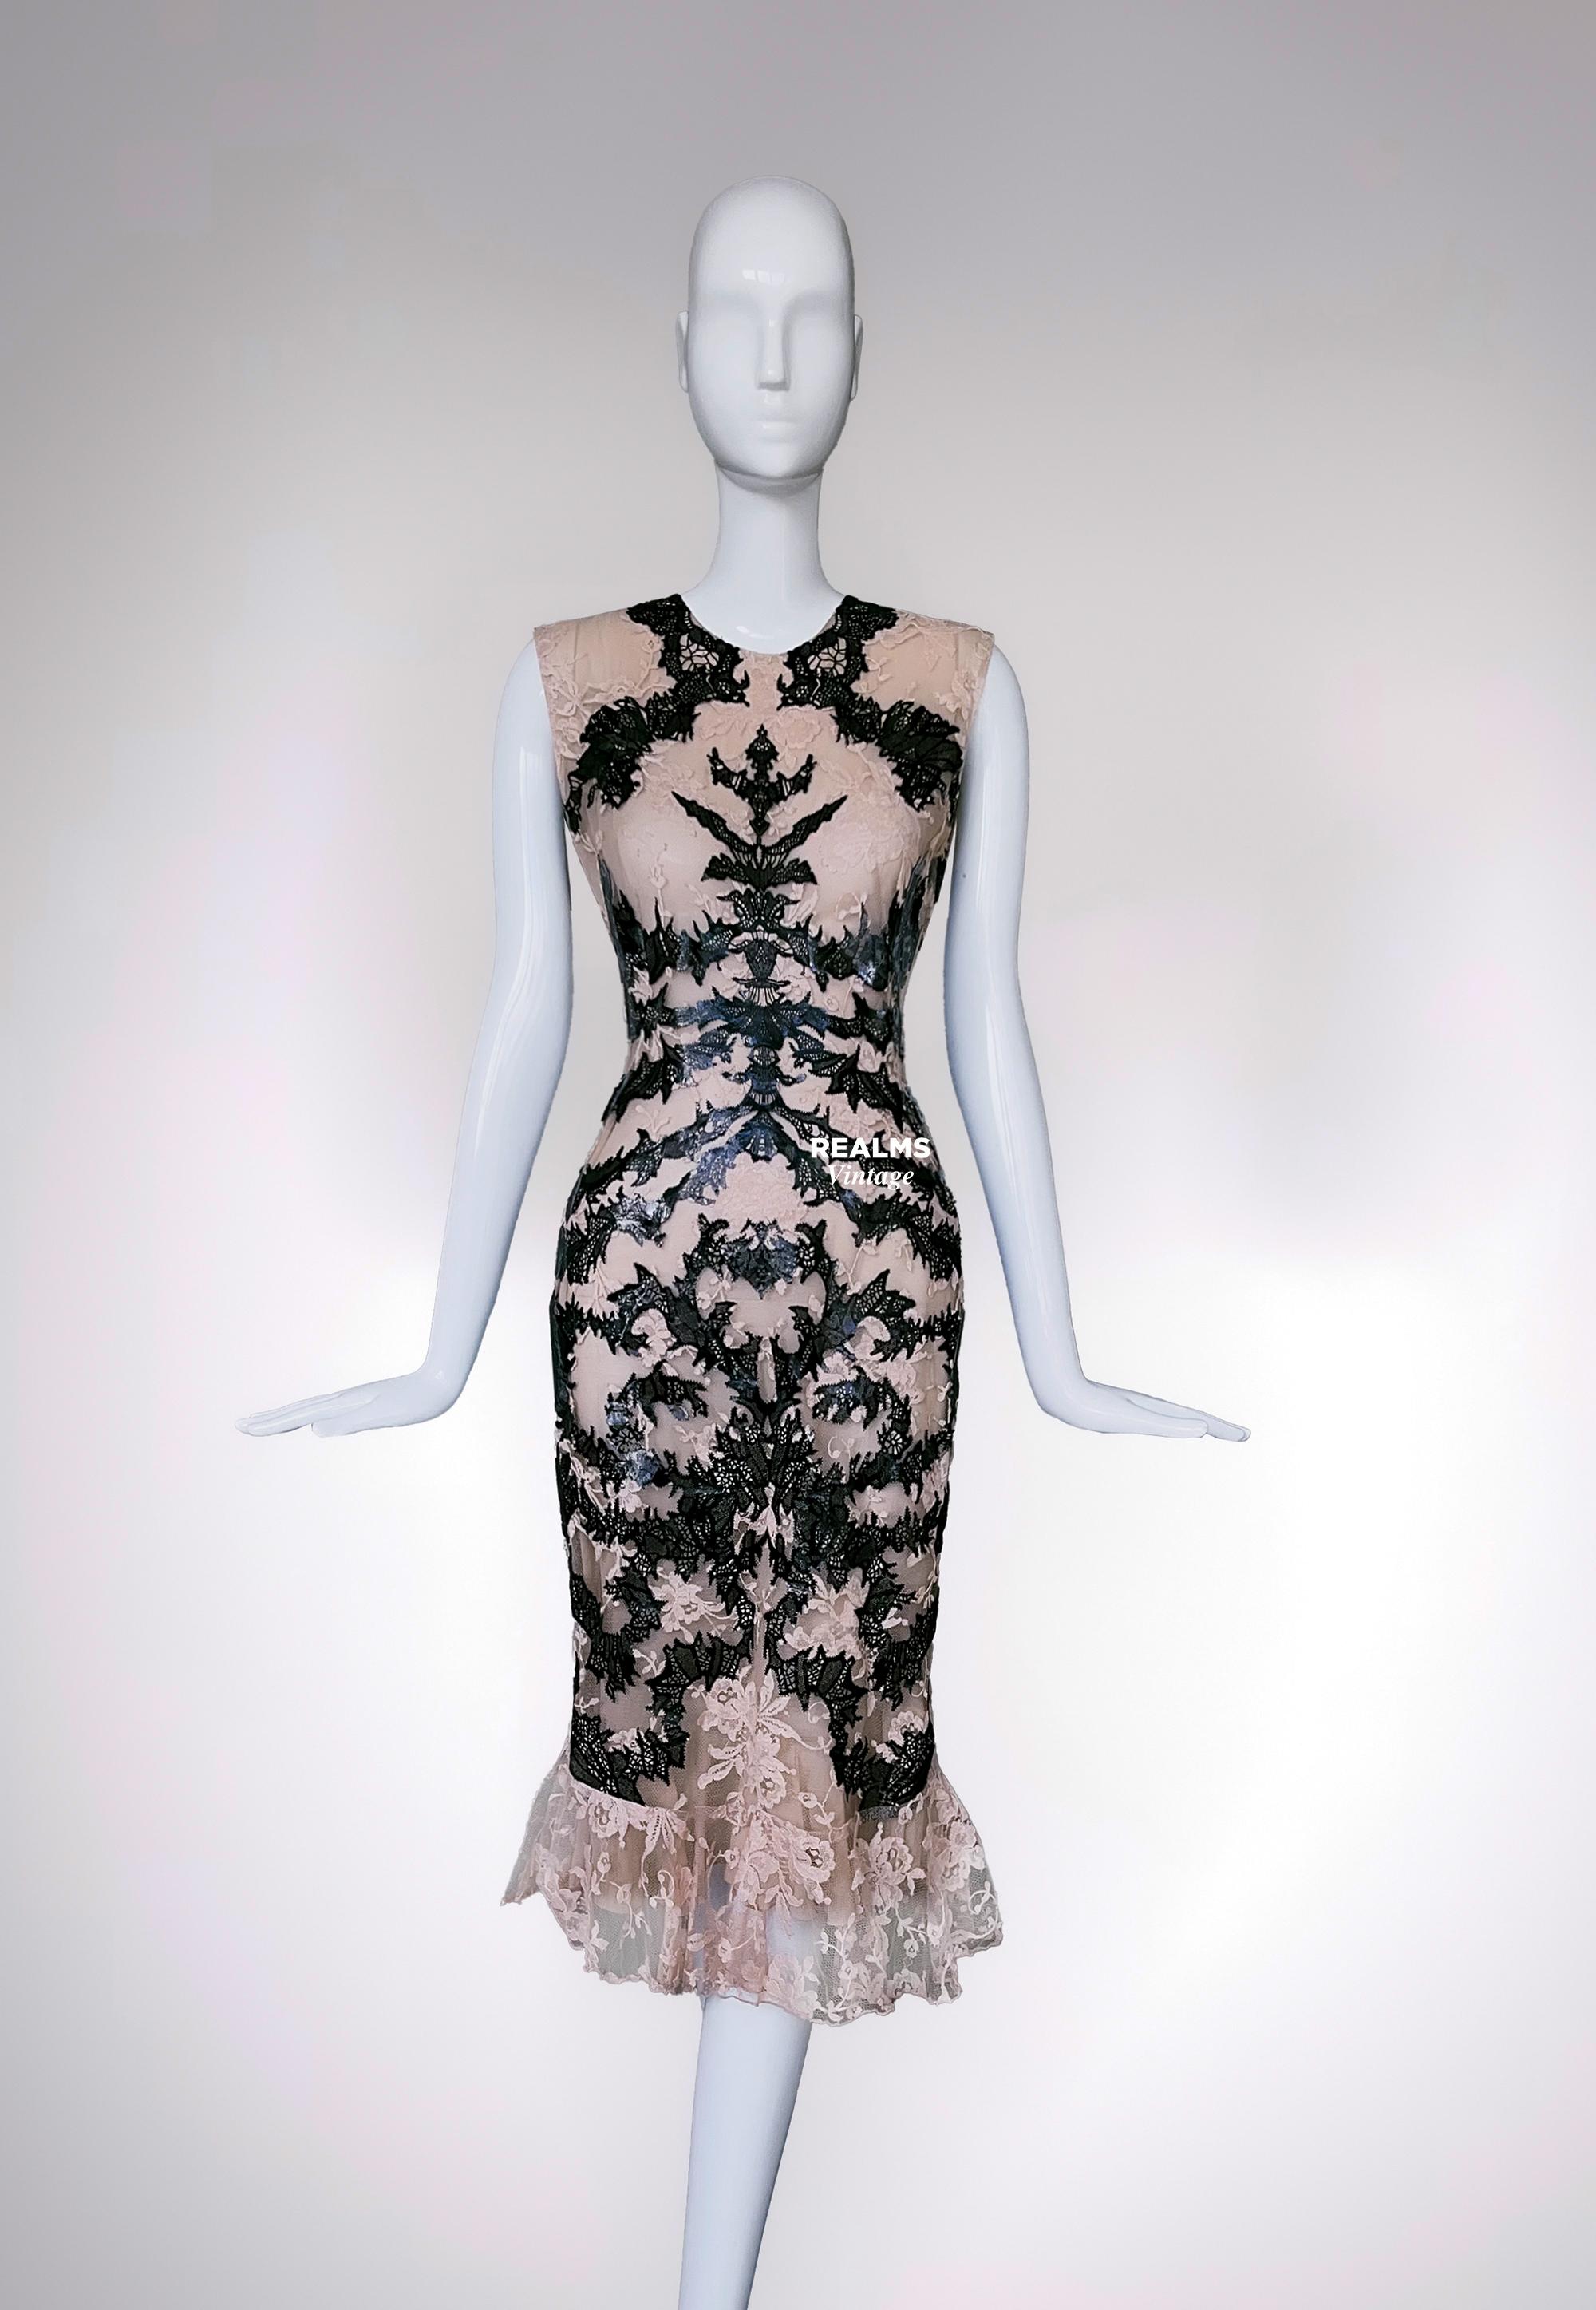 Iconic Archival Alexander McQueen SS 2012 Laser Cut Silk Lace Dress For Sale 10